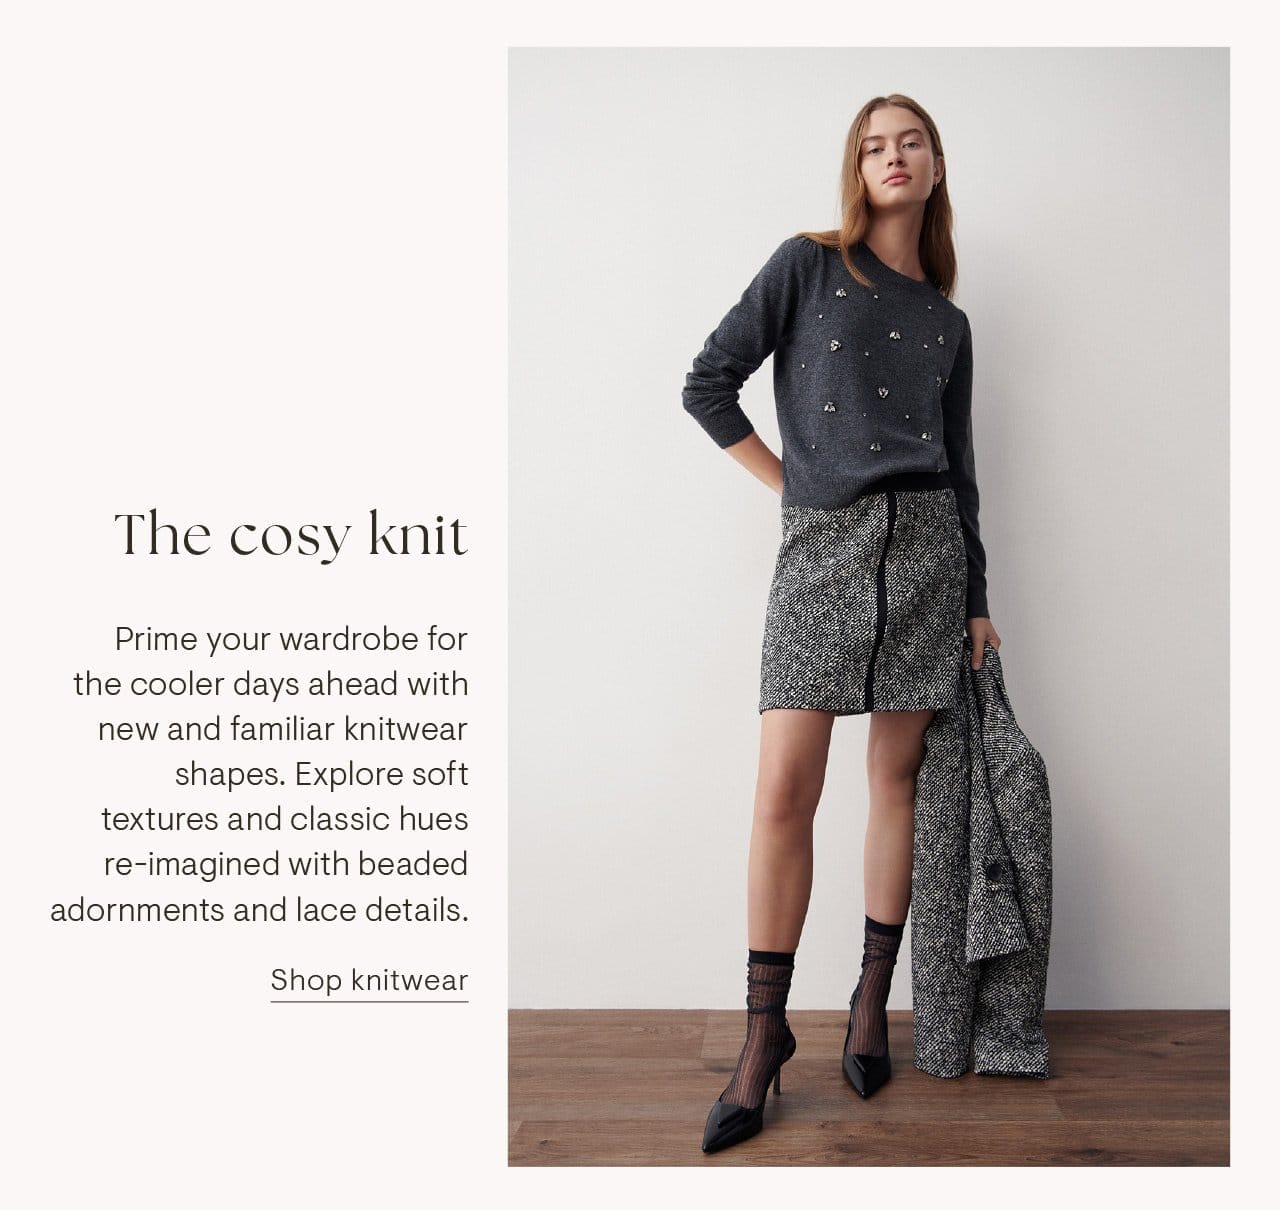 The Cosy Knit